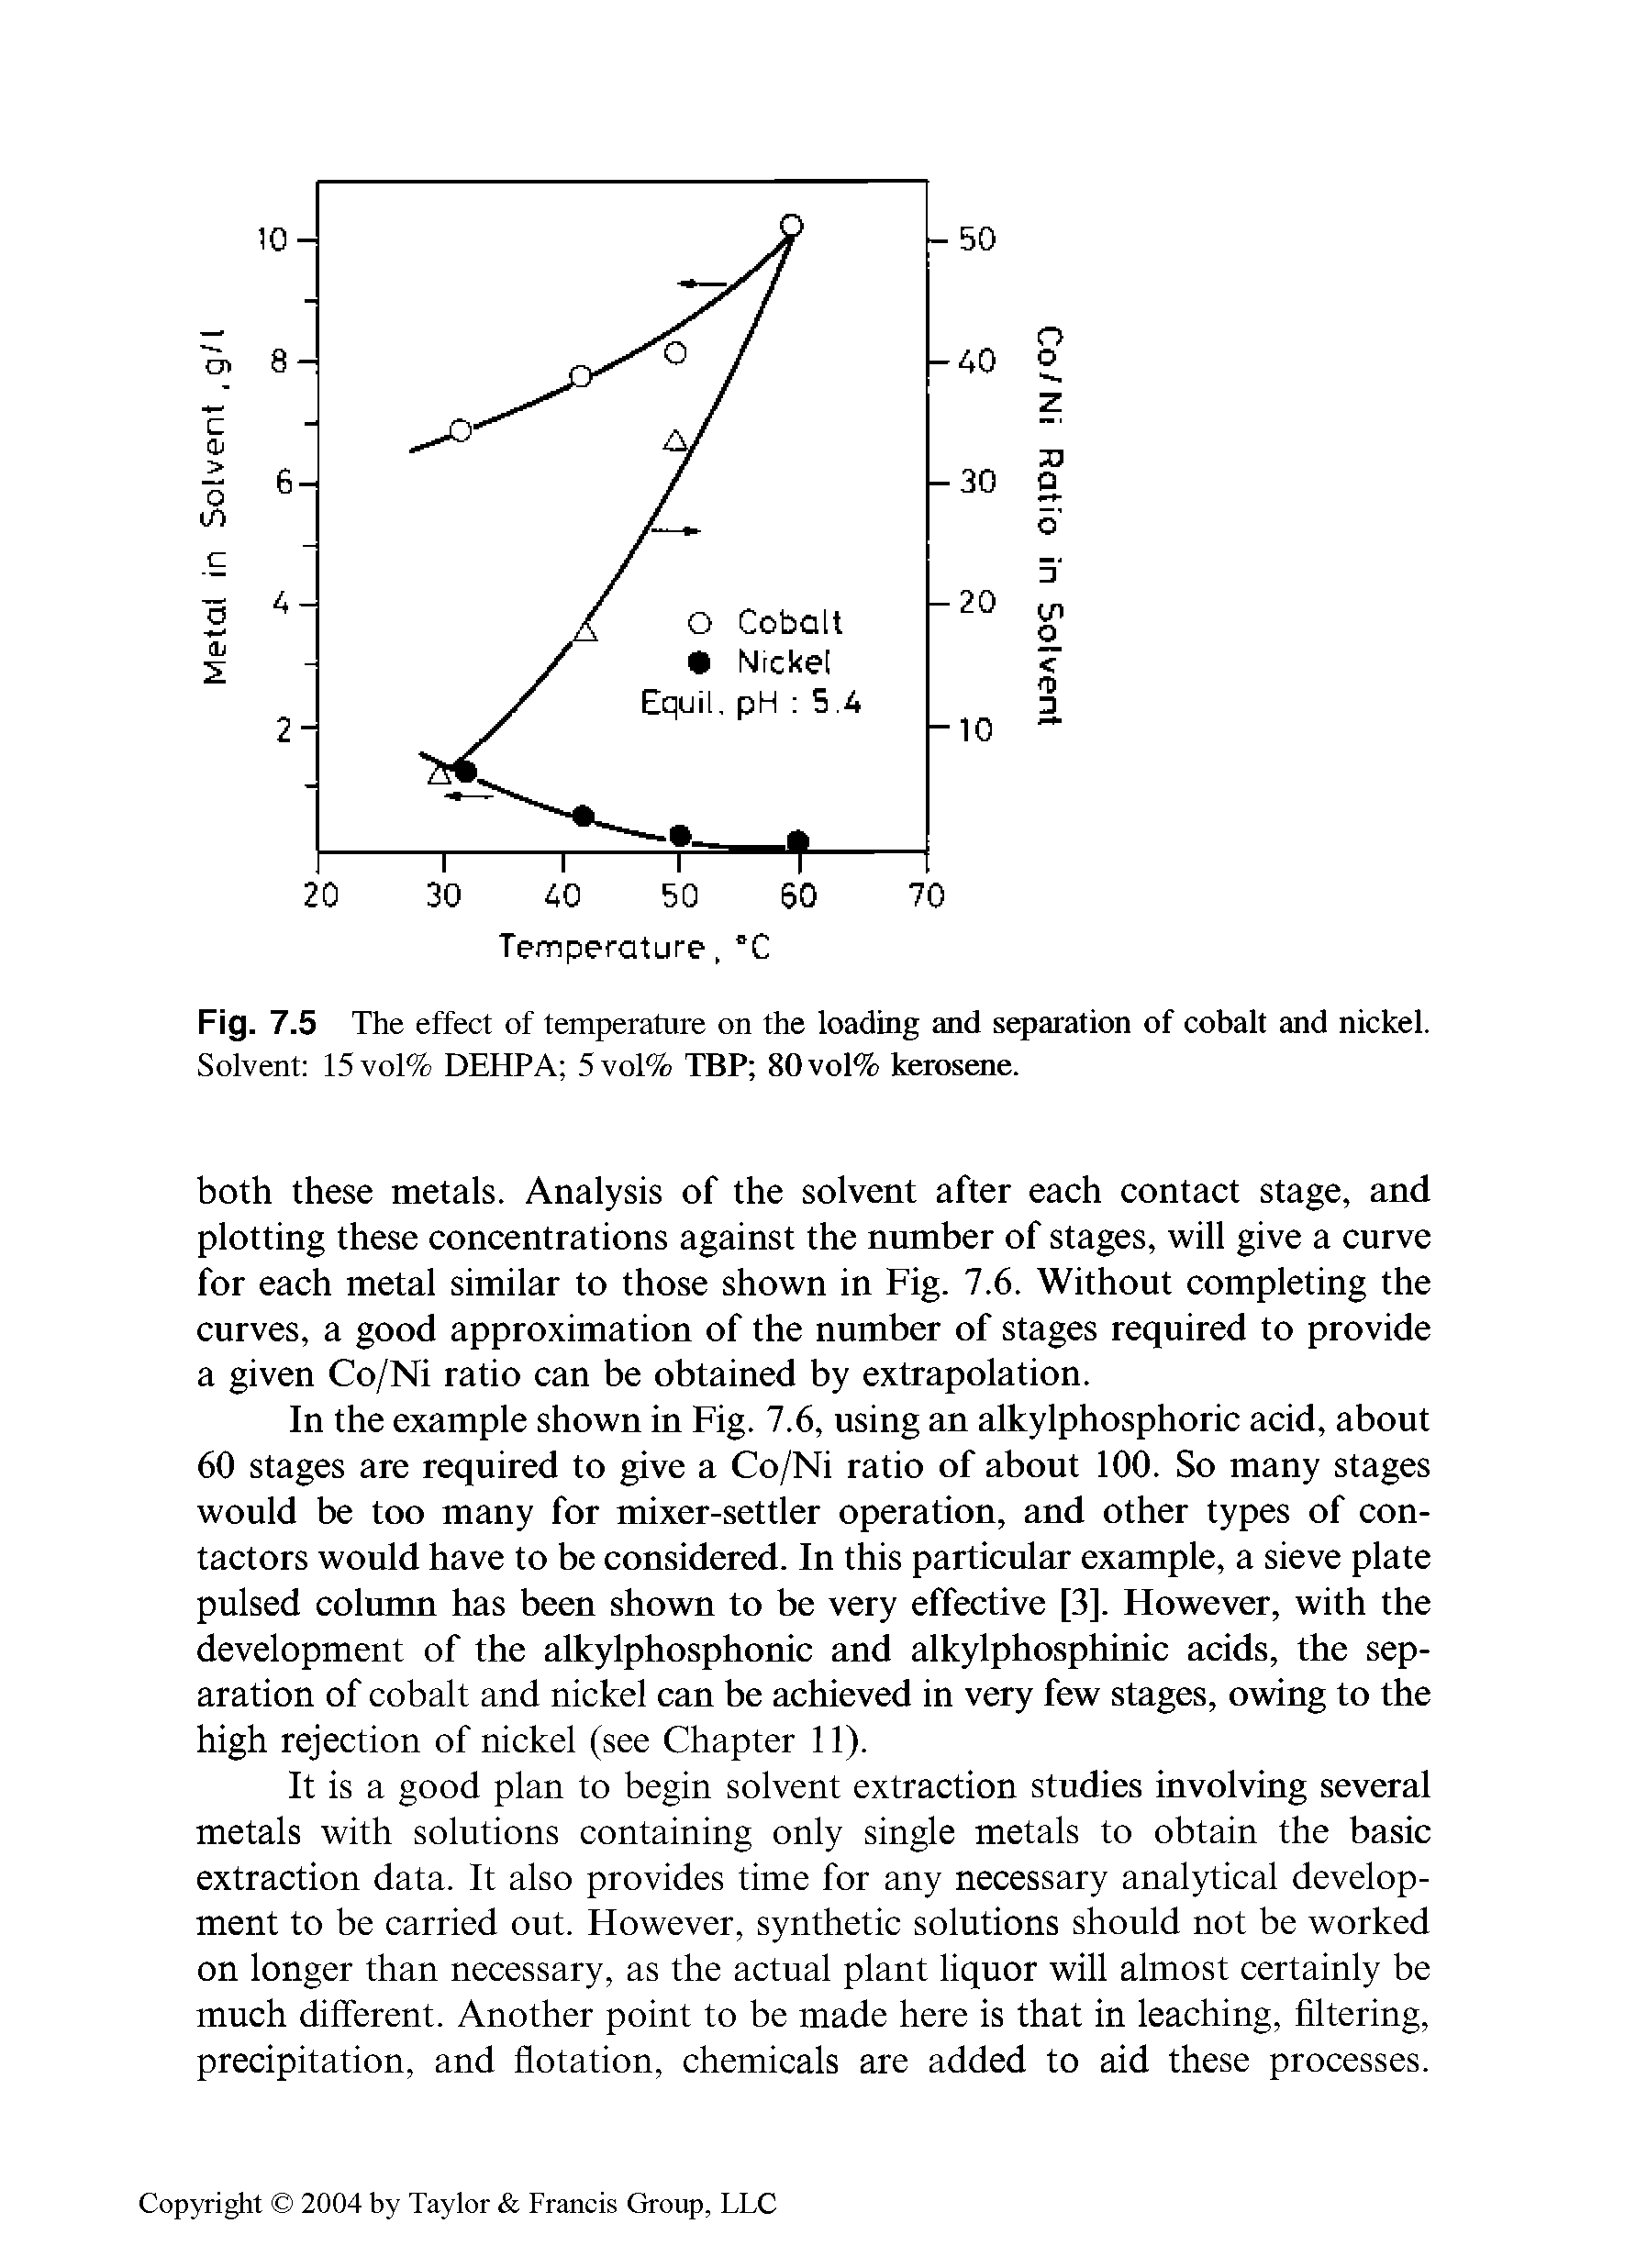 Fig. 7.5 The effect of temperature on the loading and separation of cobalt and nickel. Solvent 15vol% DEHPA 5vol% TBP 80vol% kerosene.